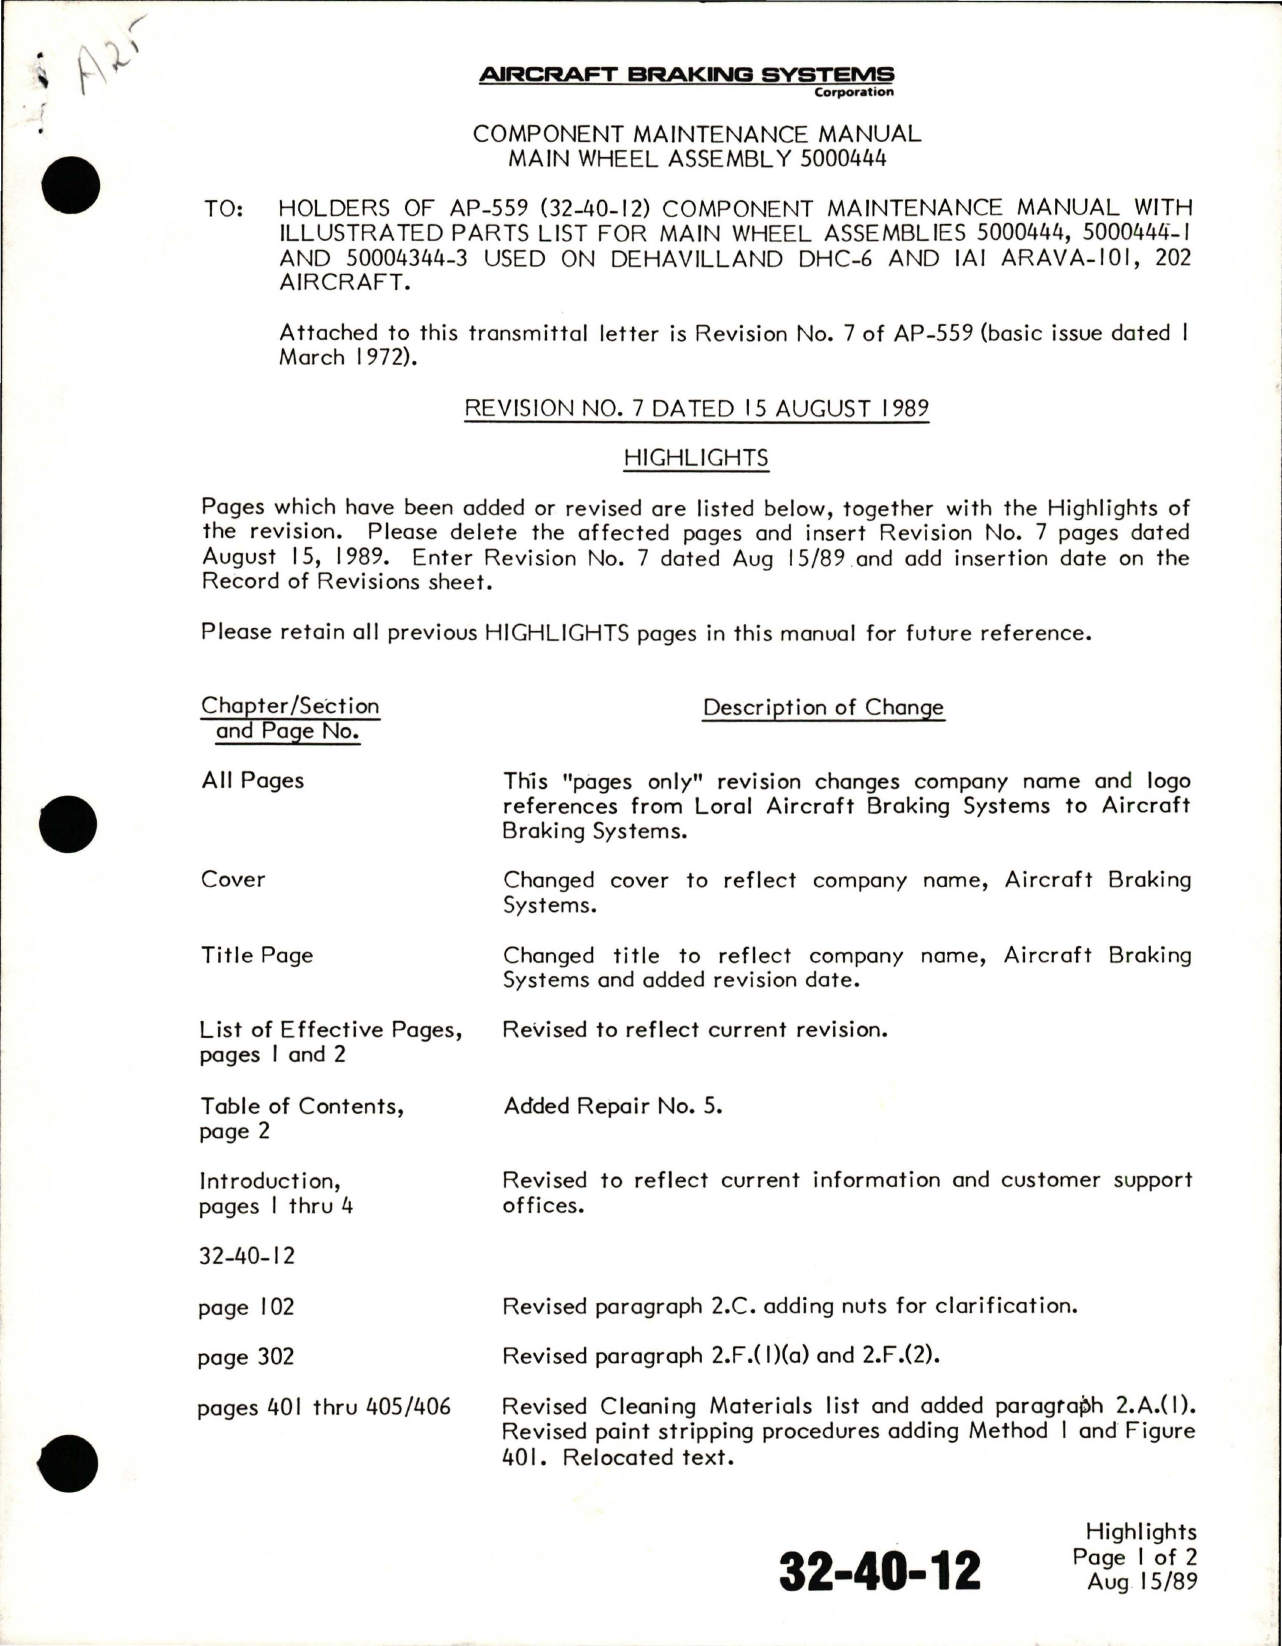 Sample page 5 from AirCorps Library document: Maintenance Manual with Illustrated Parts List for Main Wheel Assembly